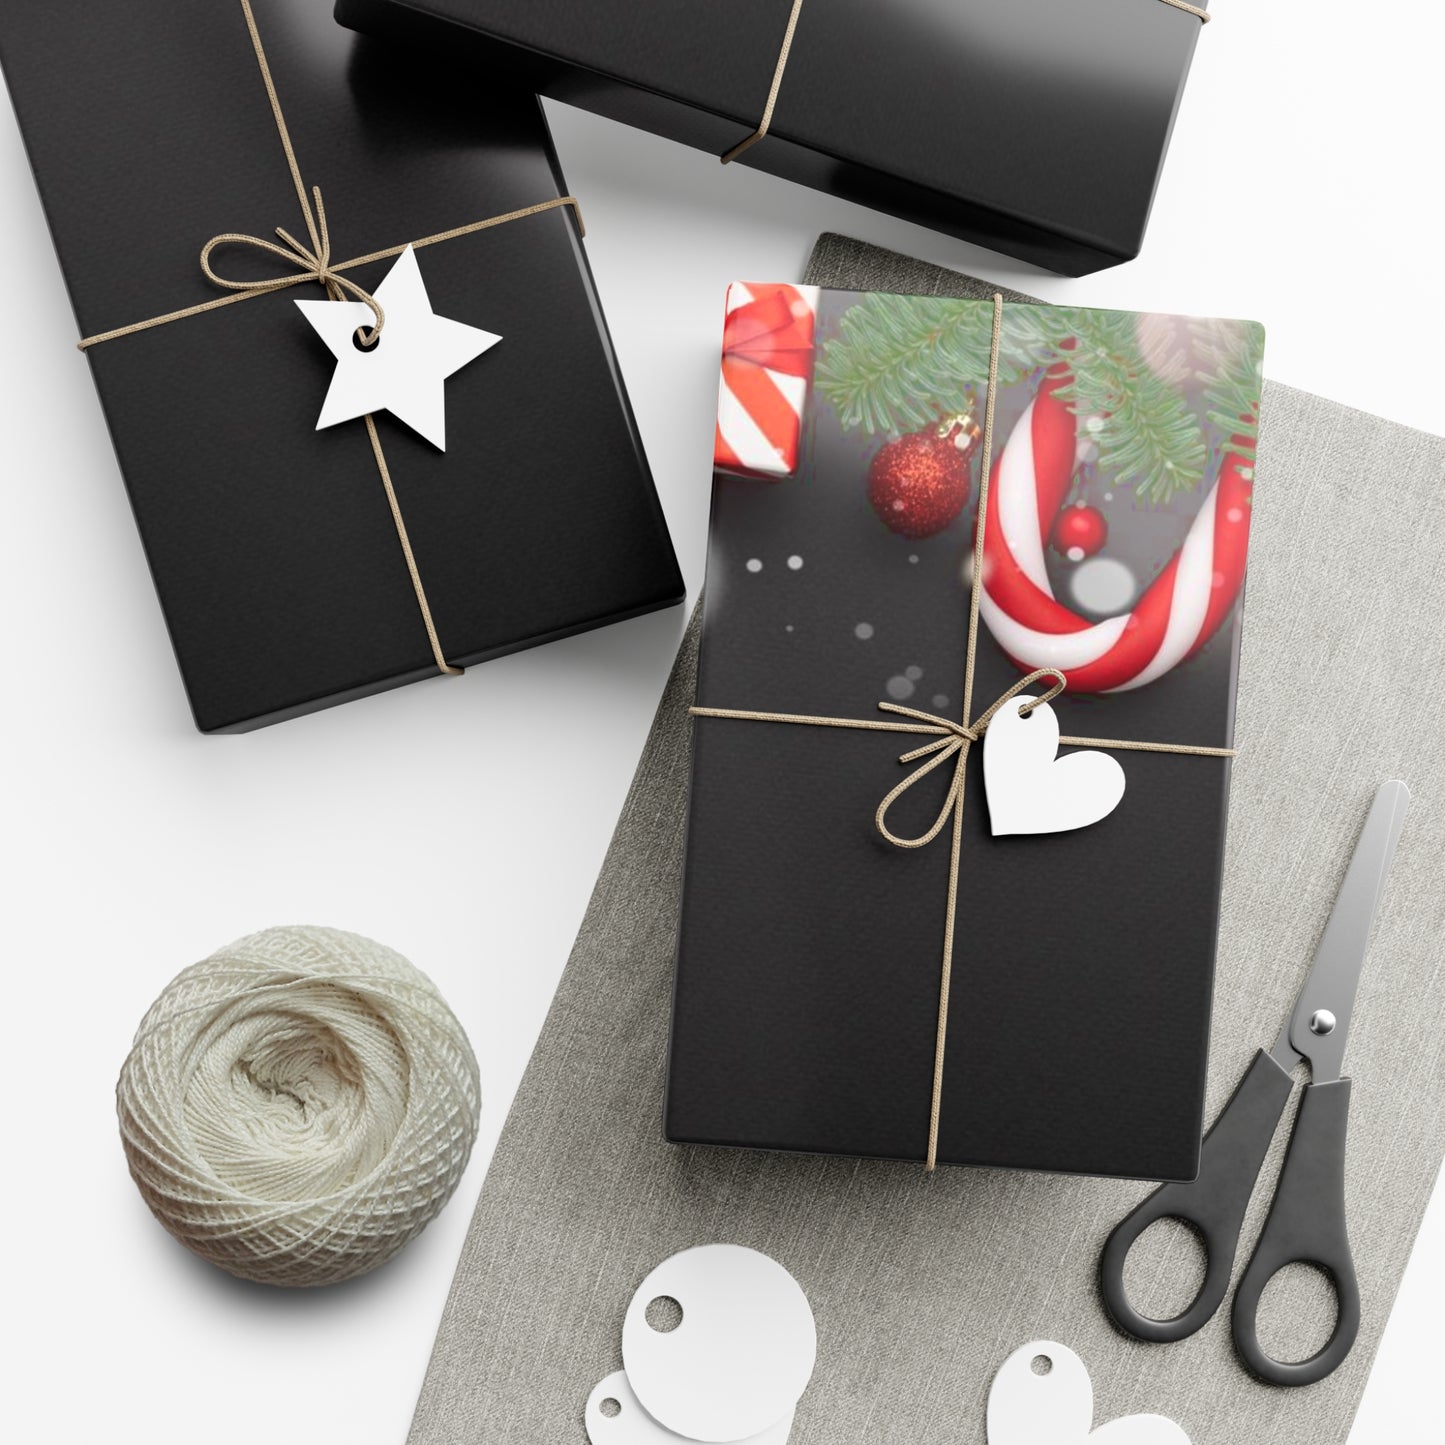 Black with Candy Canes Christmas Gift Wrap Papers